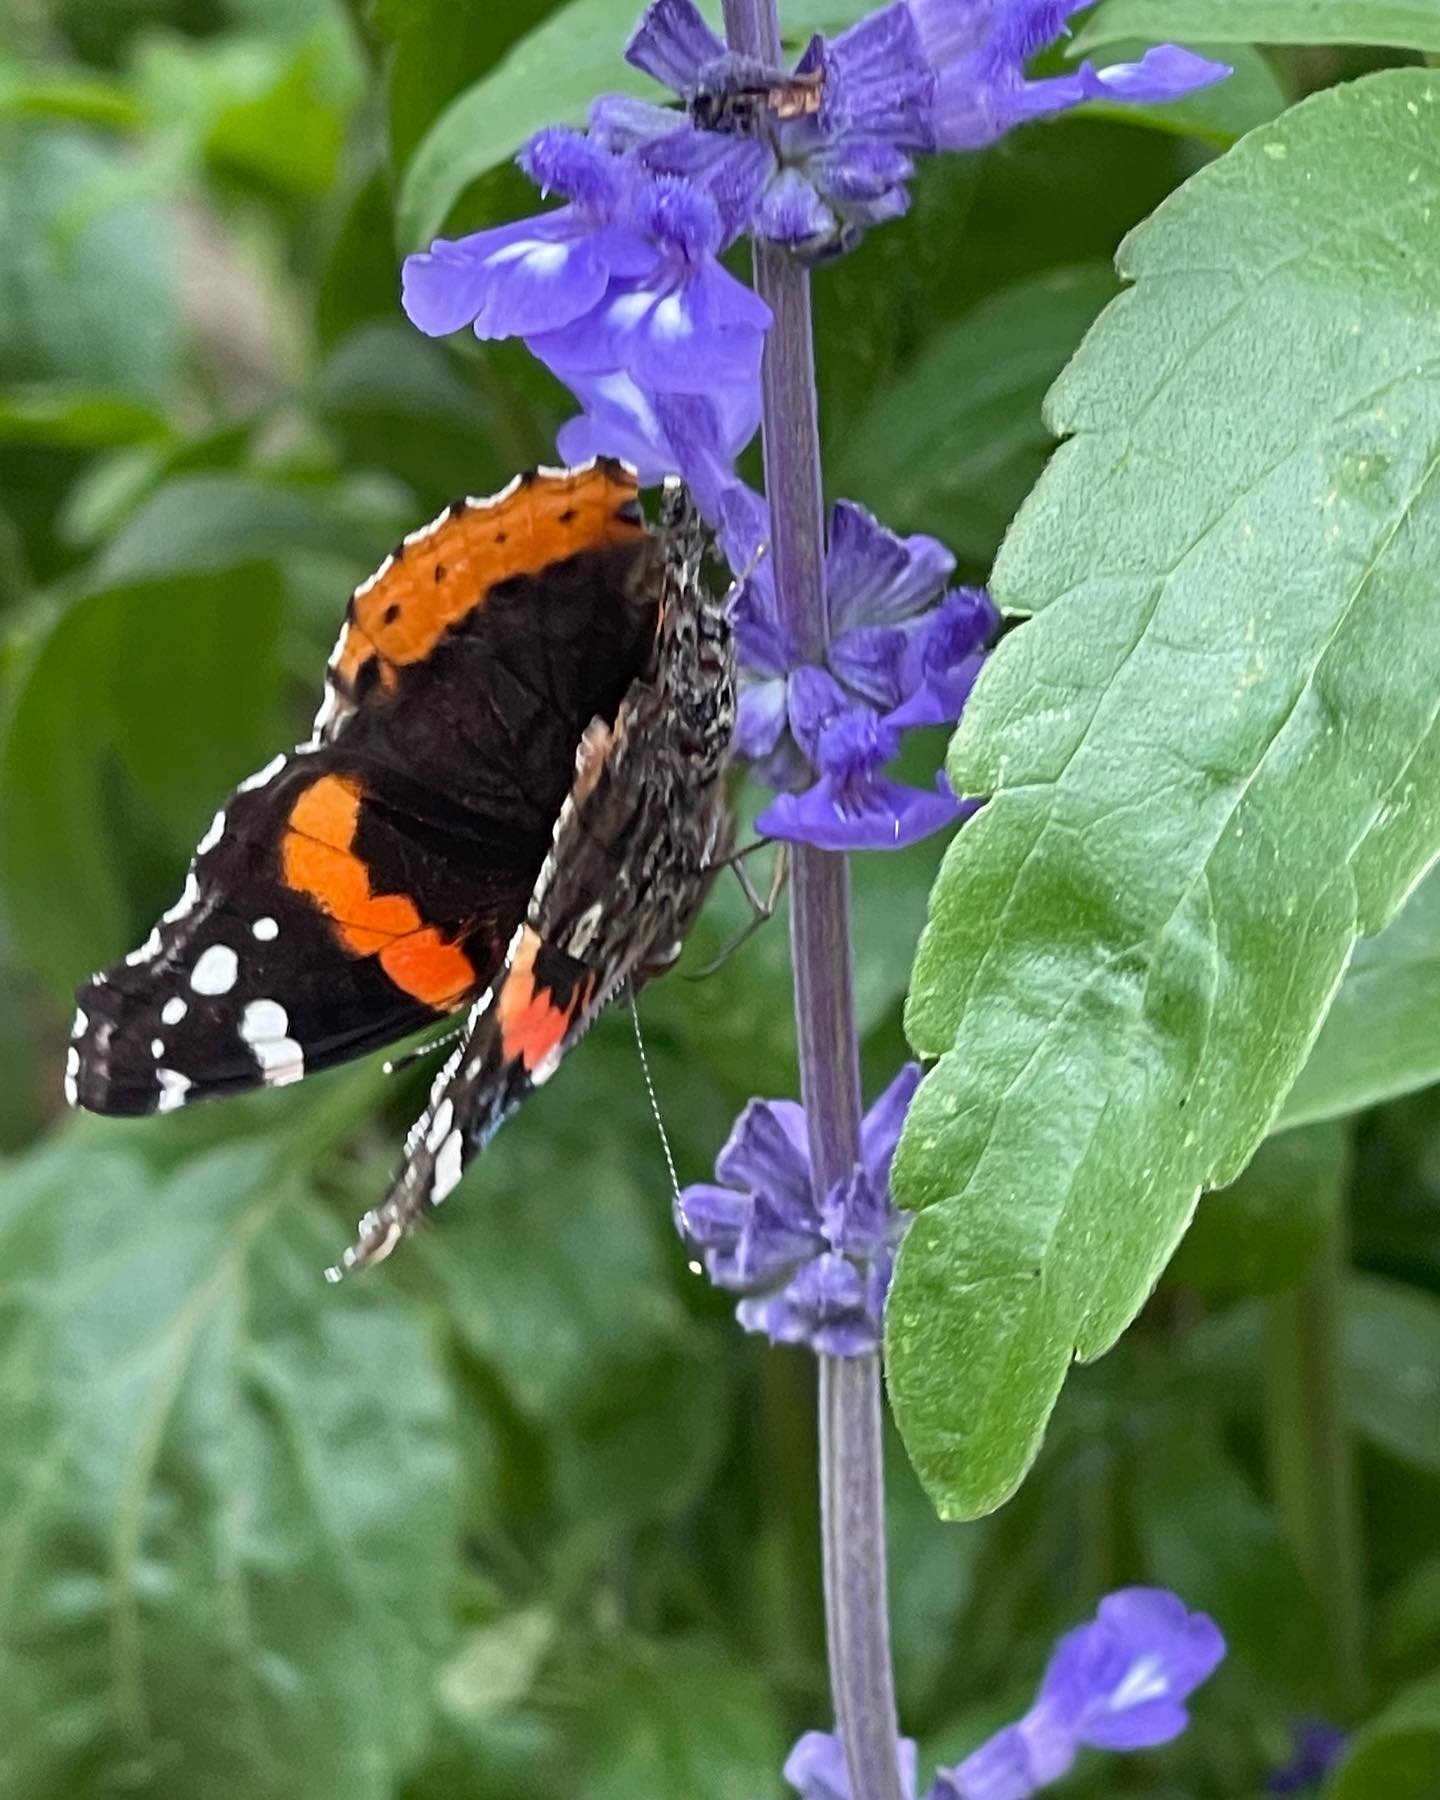 I spy with my little eye&hellip;a Red Admiral happily enjoying the Henry Duelberg Salvia. 🦋 

I am happily get lost watching the bees and butterflies in the garden. I know I have done my job when I see them visiting all of the native plants for food